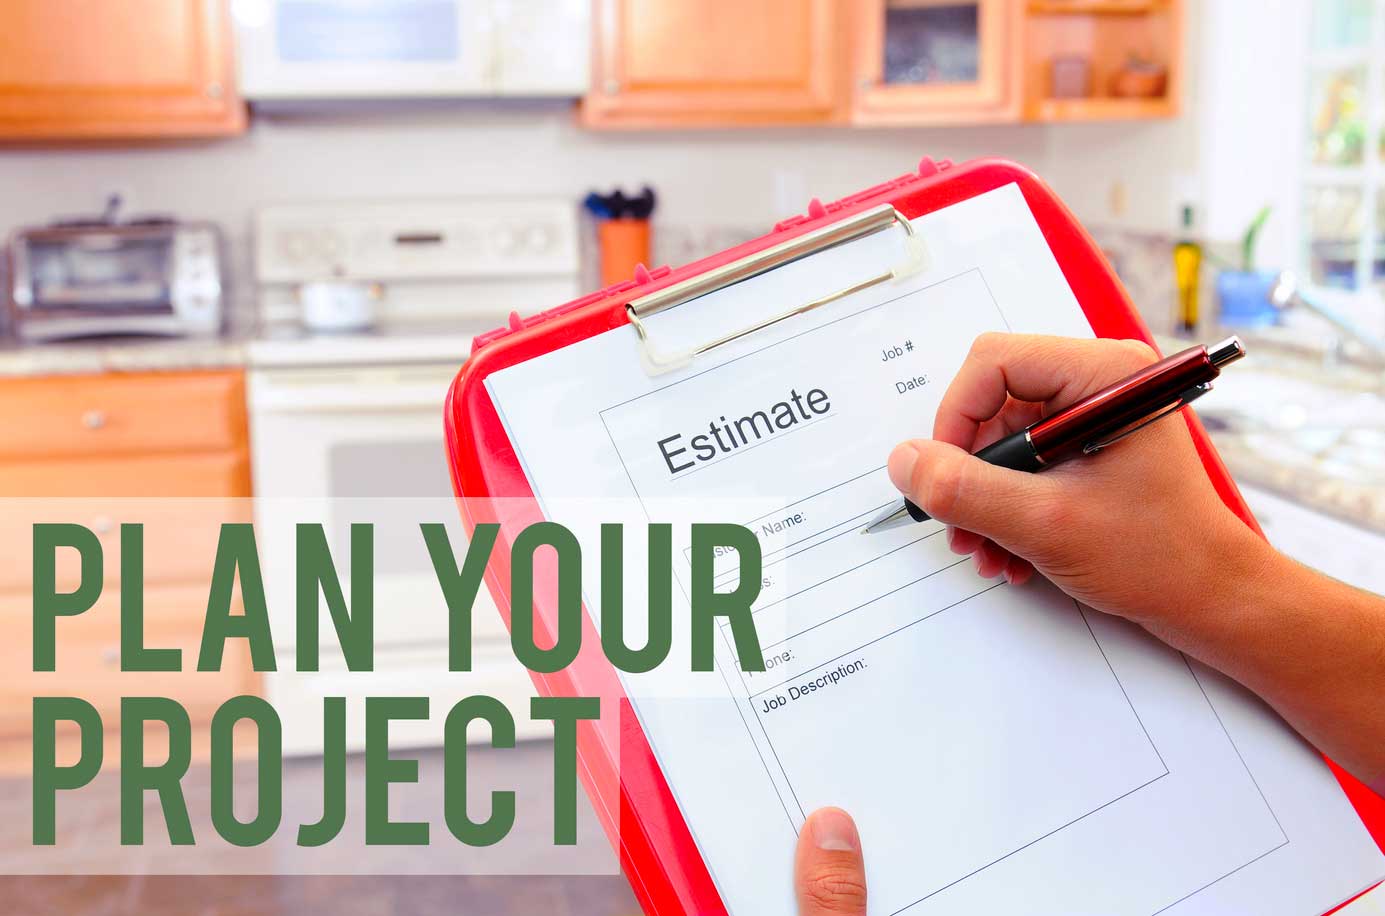 Plan your project